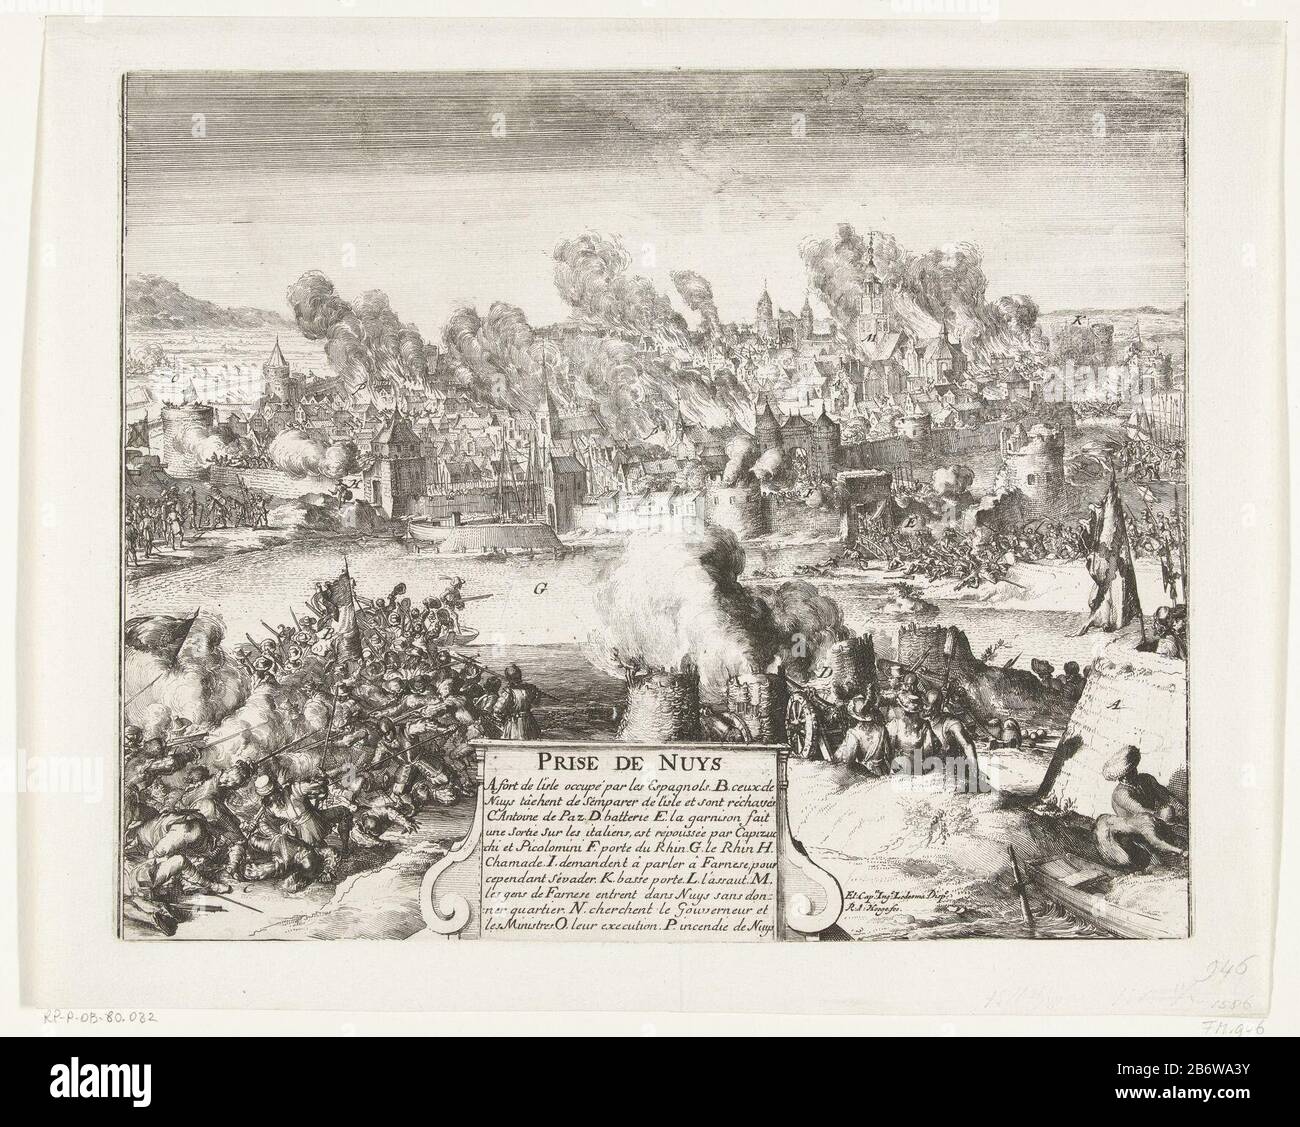 Inname En Plundering Van Neuss 1586 Prise De Nuys Titel Op Object Taking And Looting Of Neuss By The Army Parma July 26 1586 In The Foreground Skirmishes And The Besieging Troops